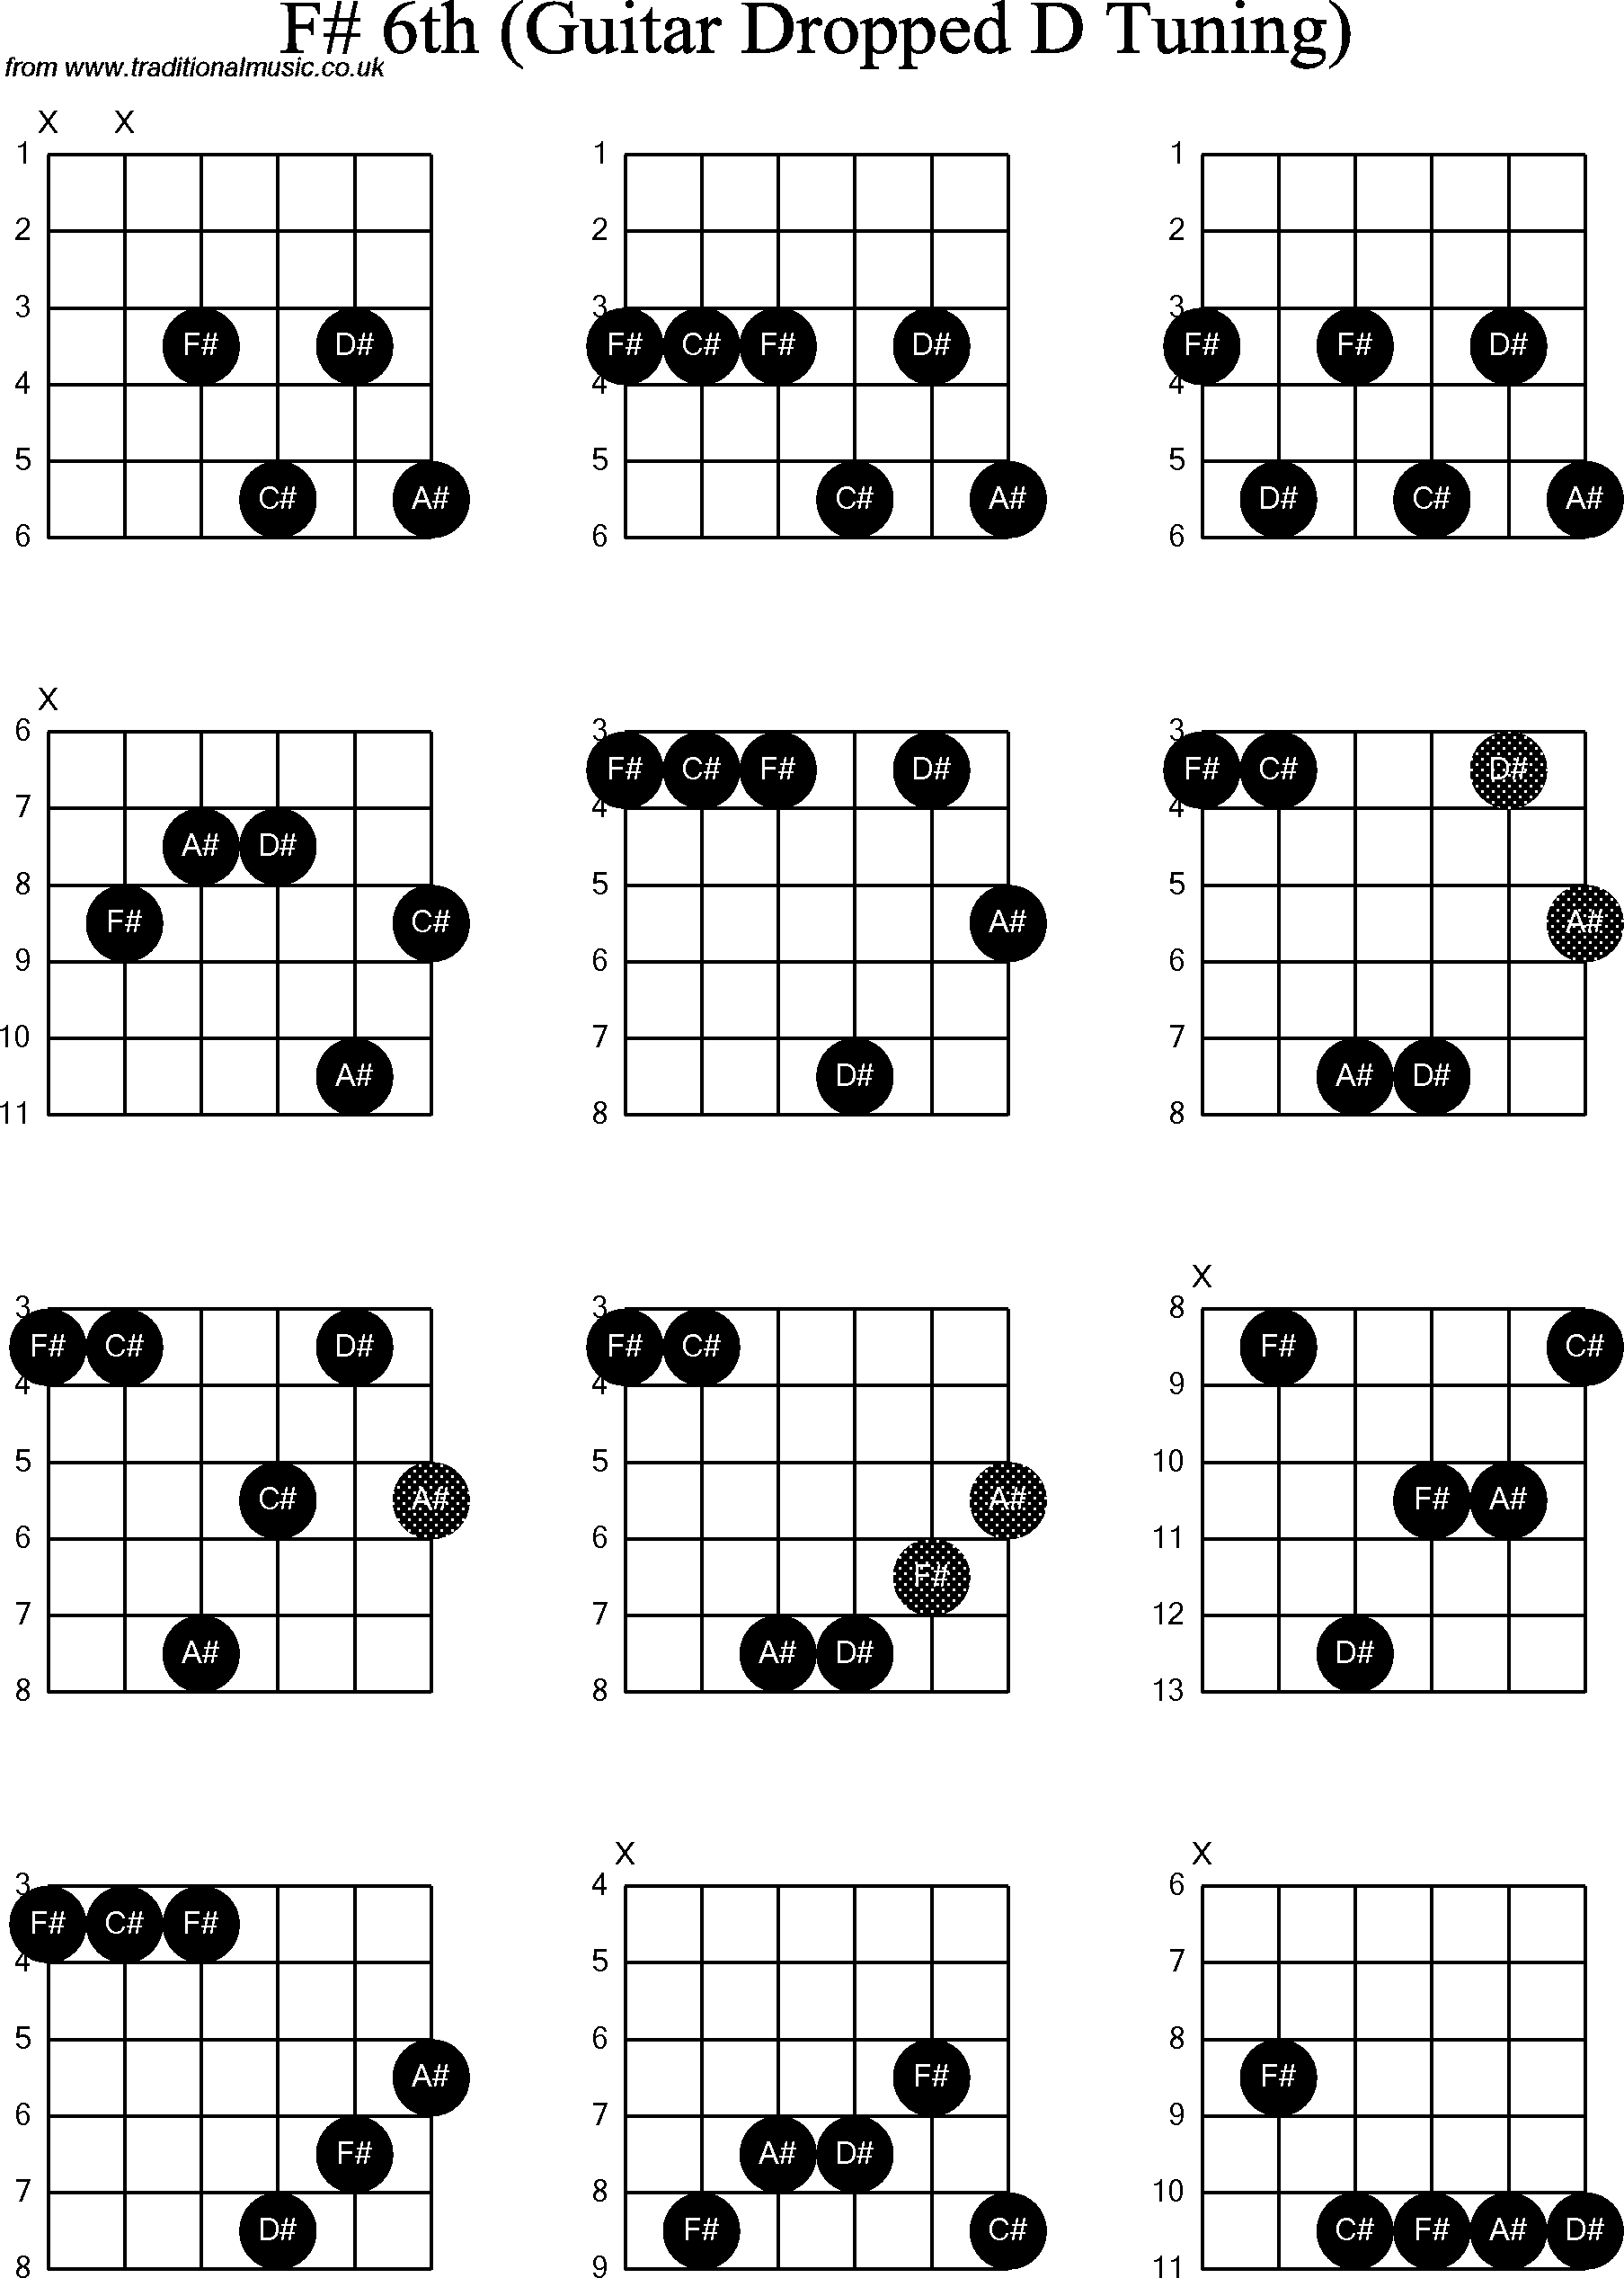 Chord diagrams for dropped D Guitar(DADGBE), F Sharp6th